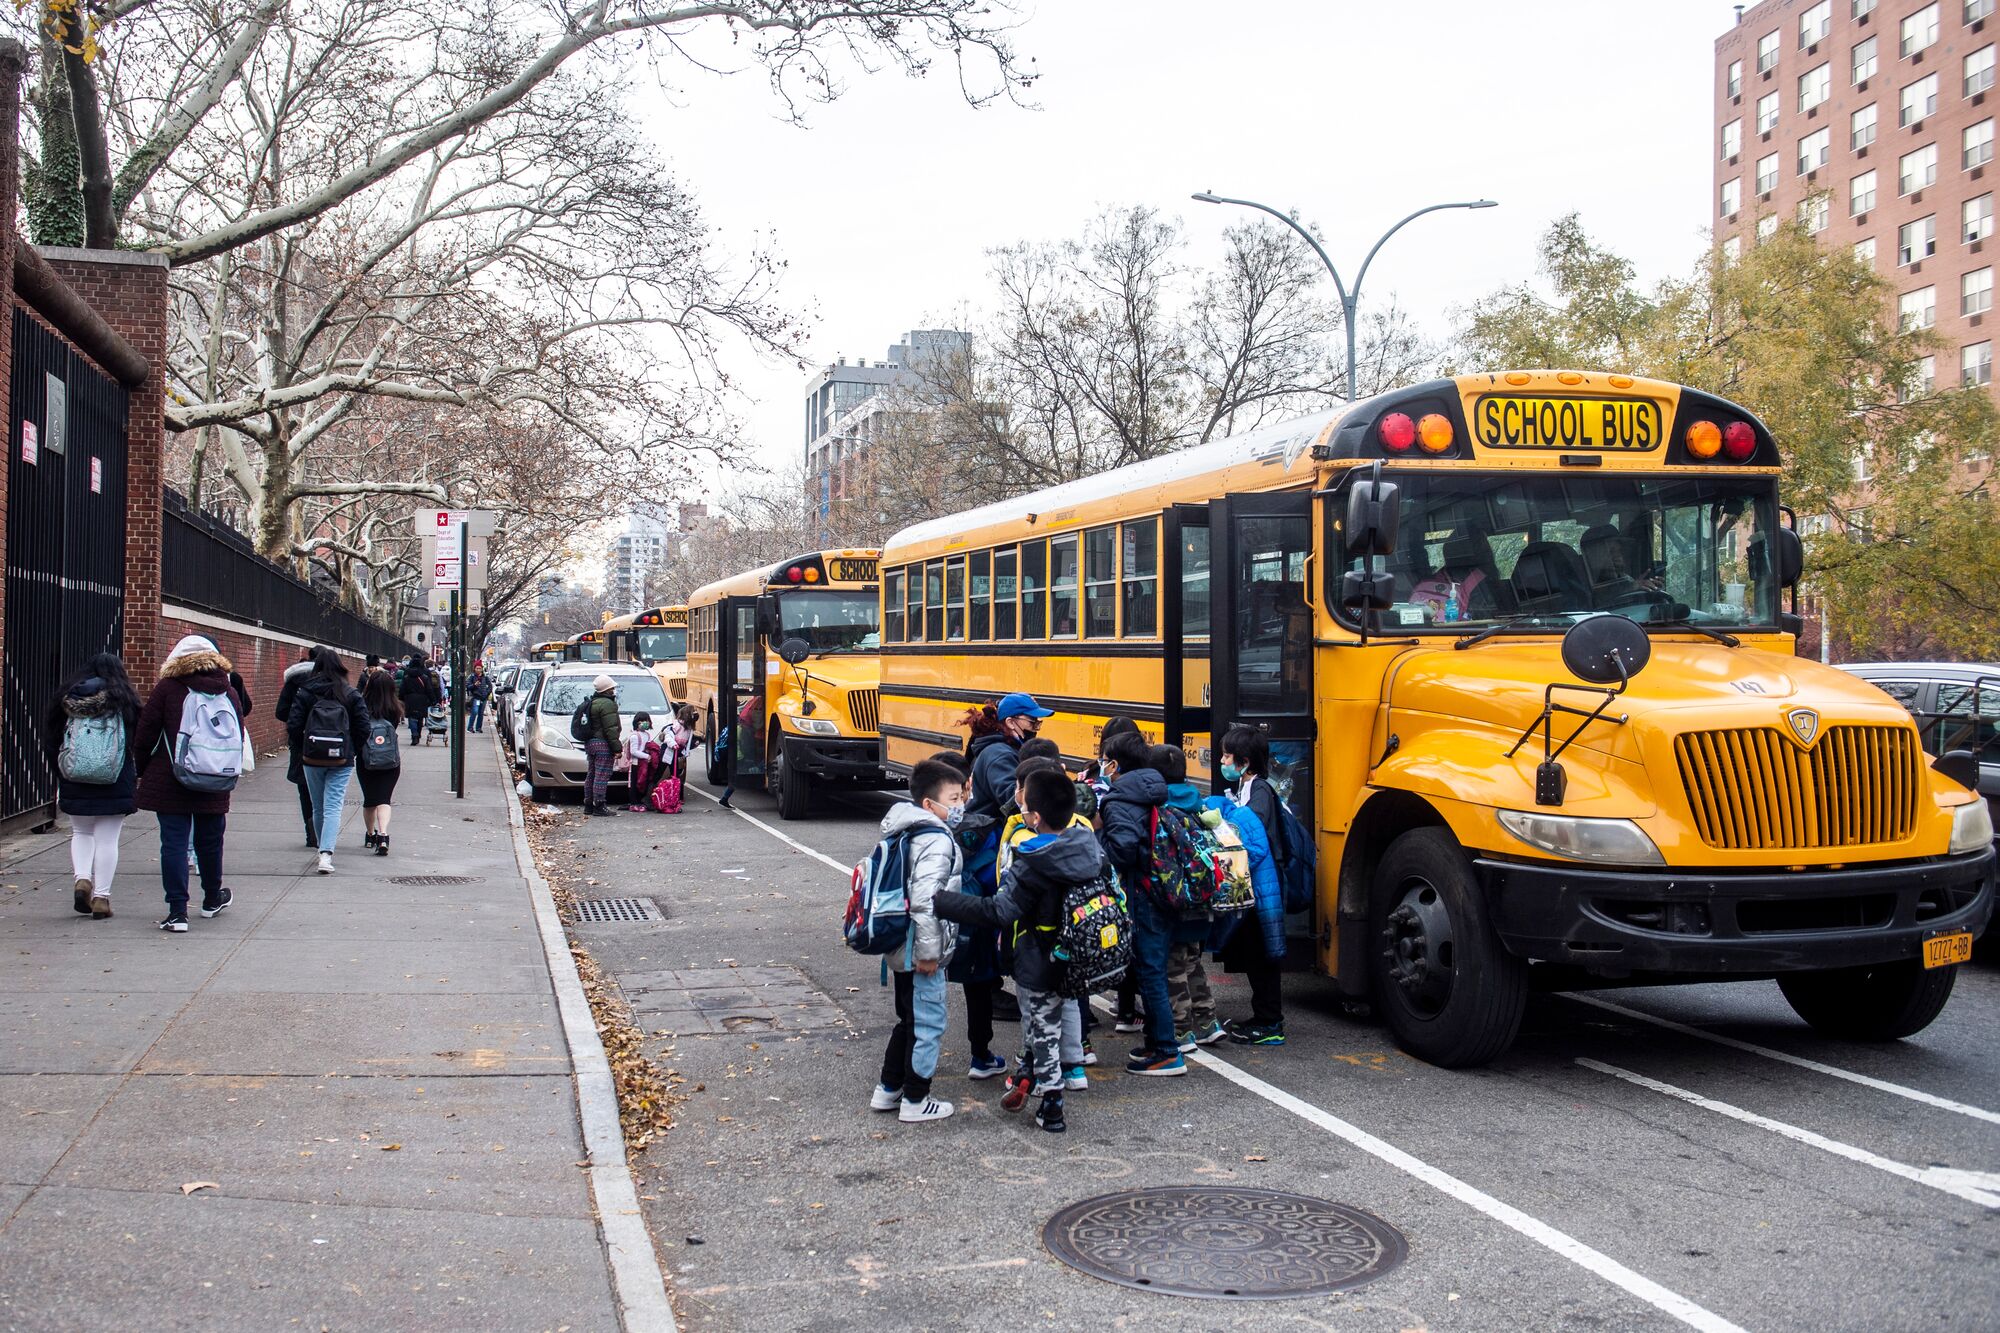 Students board a school bus outside New Explorations into Science, Technology and Math (NEST+m) school on the Lower East Side neighborhood of Manhattan on Tuesday, Dec. 21, 2021, in New York.